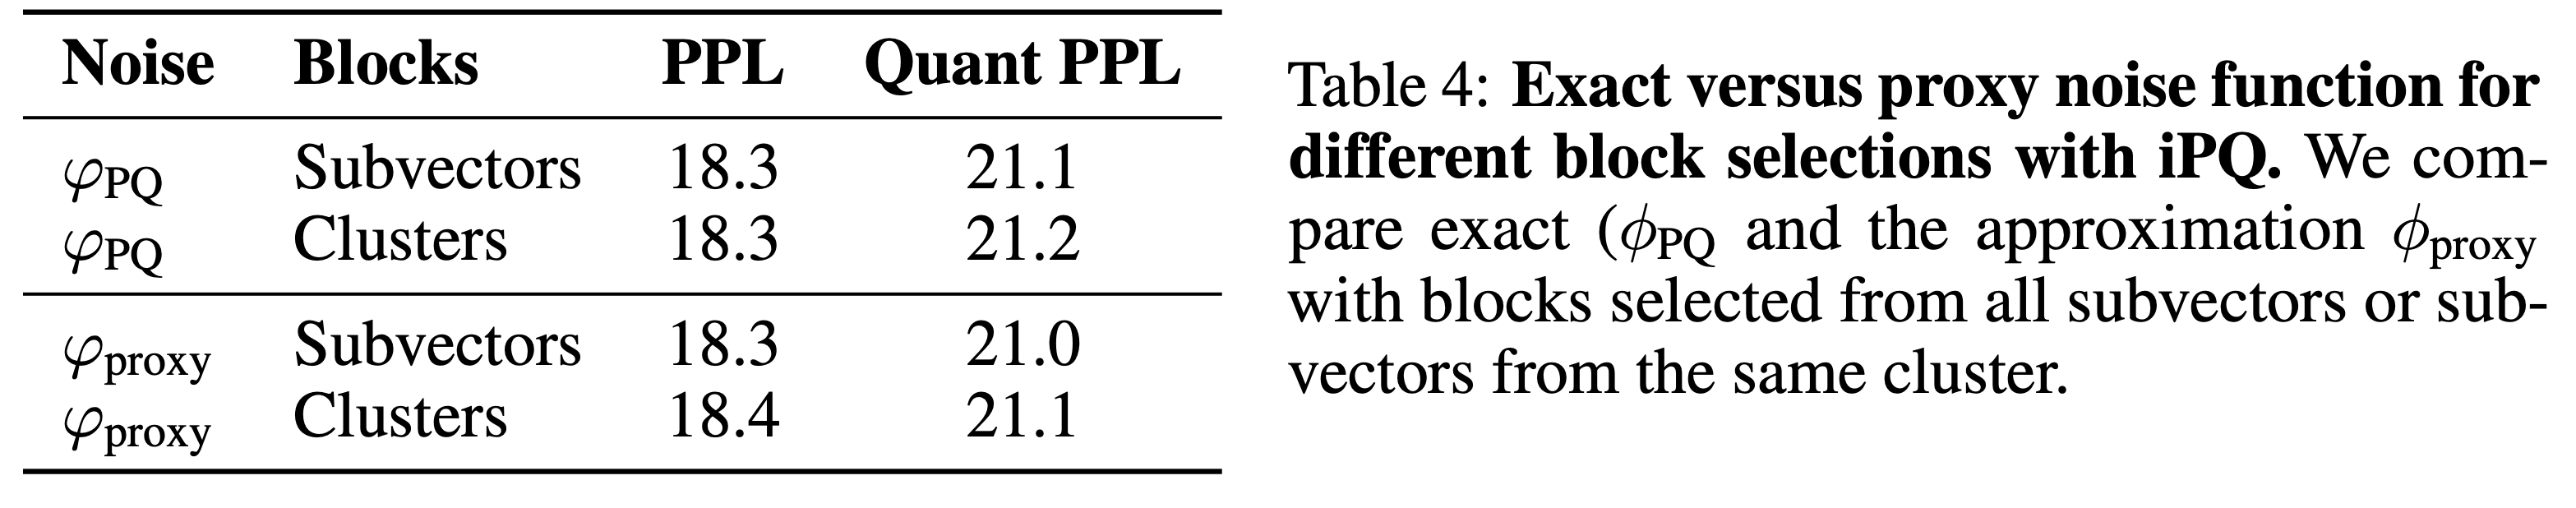 Exact versus proxy noise function for different block selections with iPQ